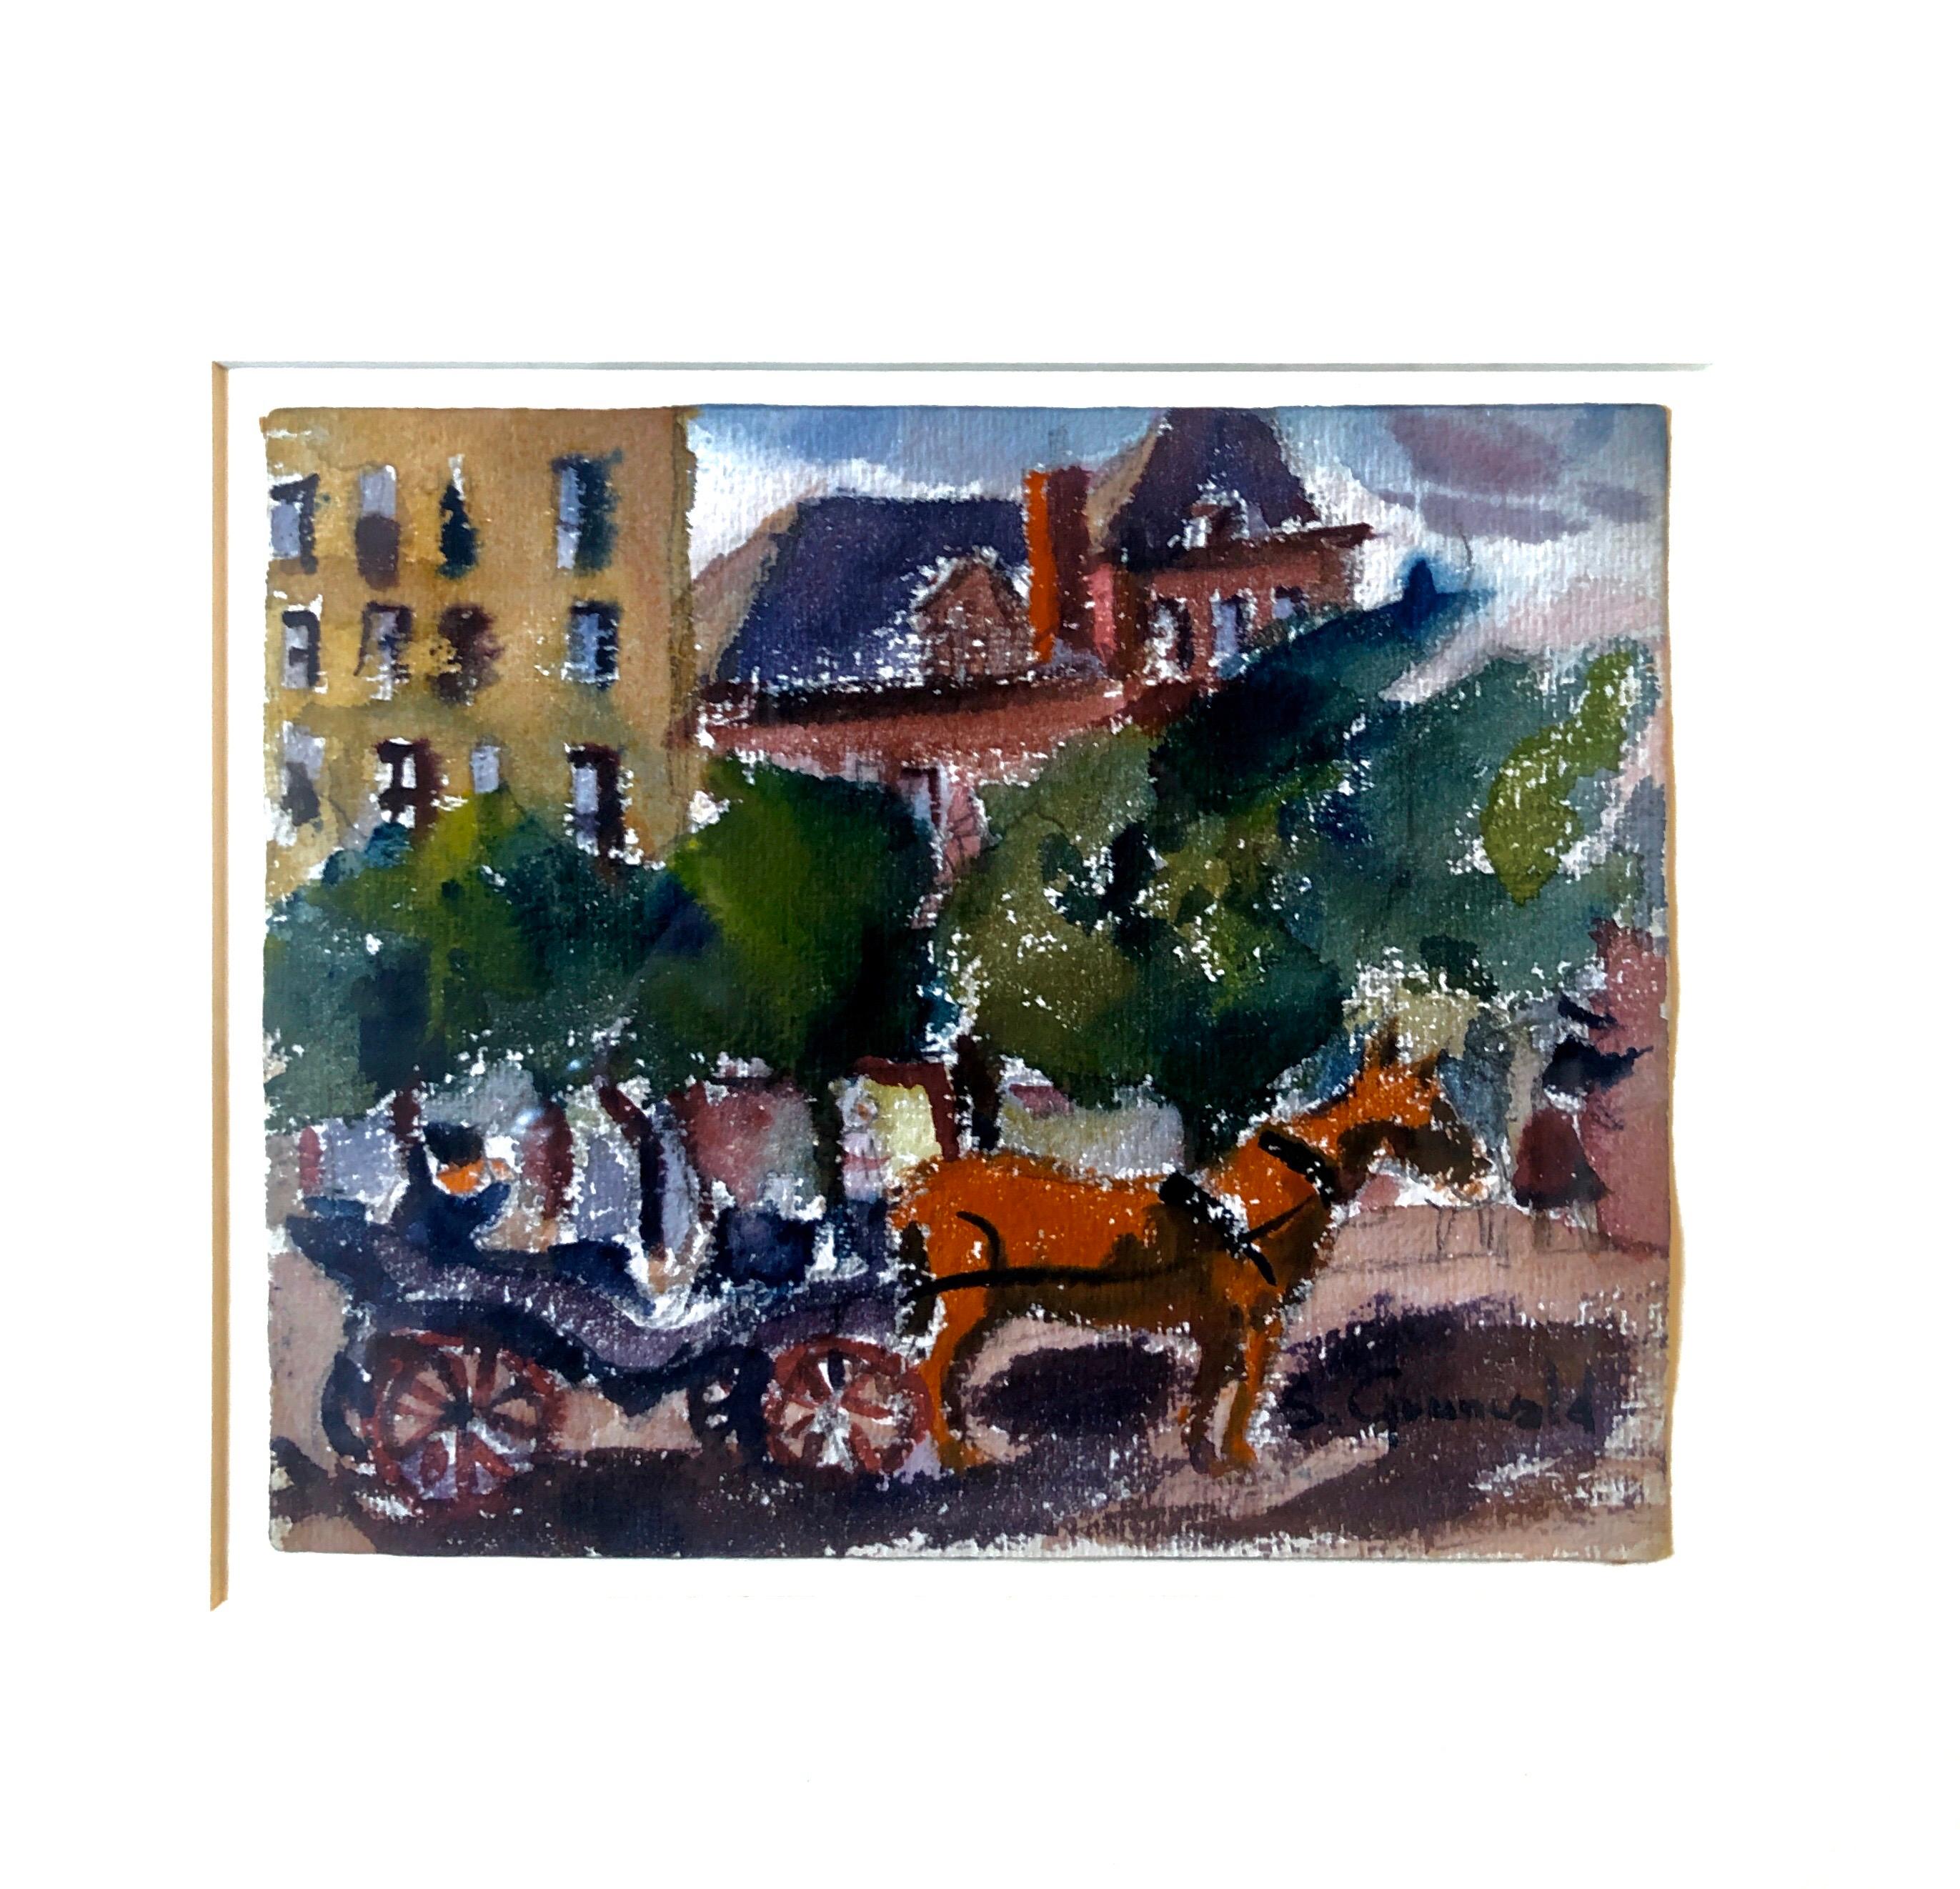 1940's American WPA Modernist New York Watercolor Painting 59th st Central Park - Gray Figurative Art by Samuel Grunvald